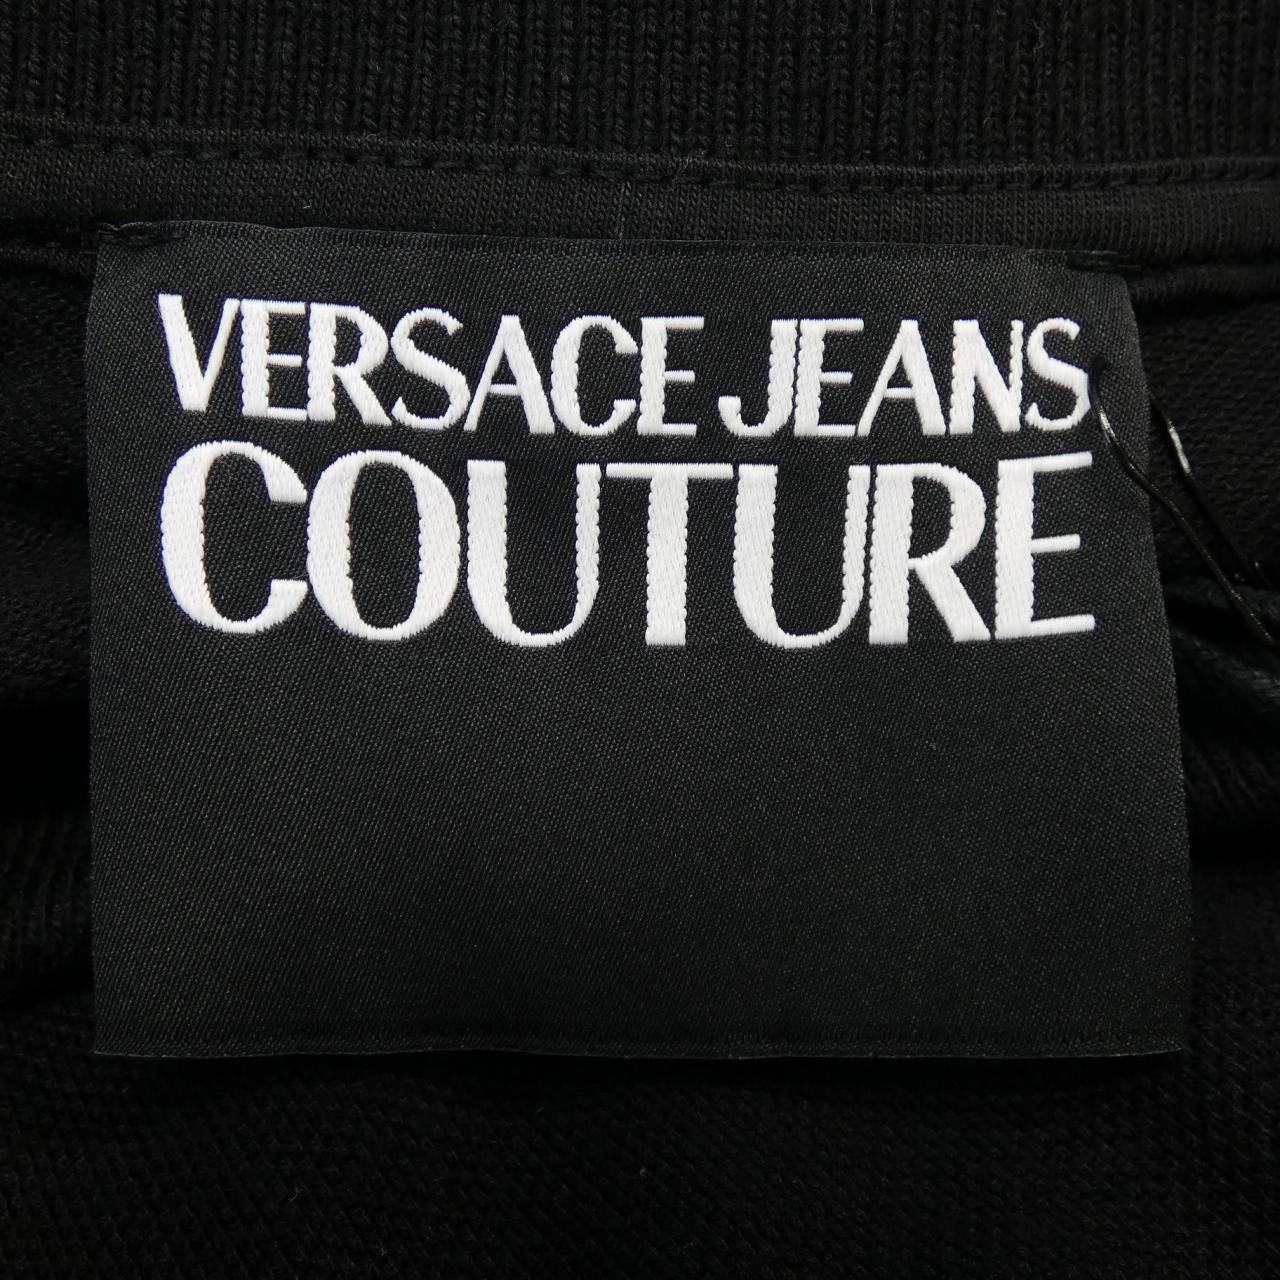 VERSACE JEANS ポロシャツ